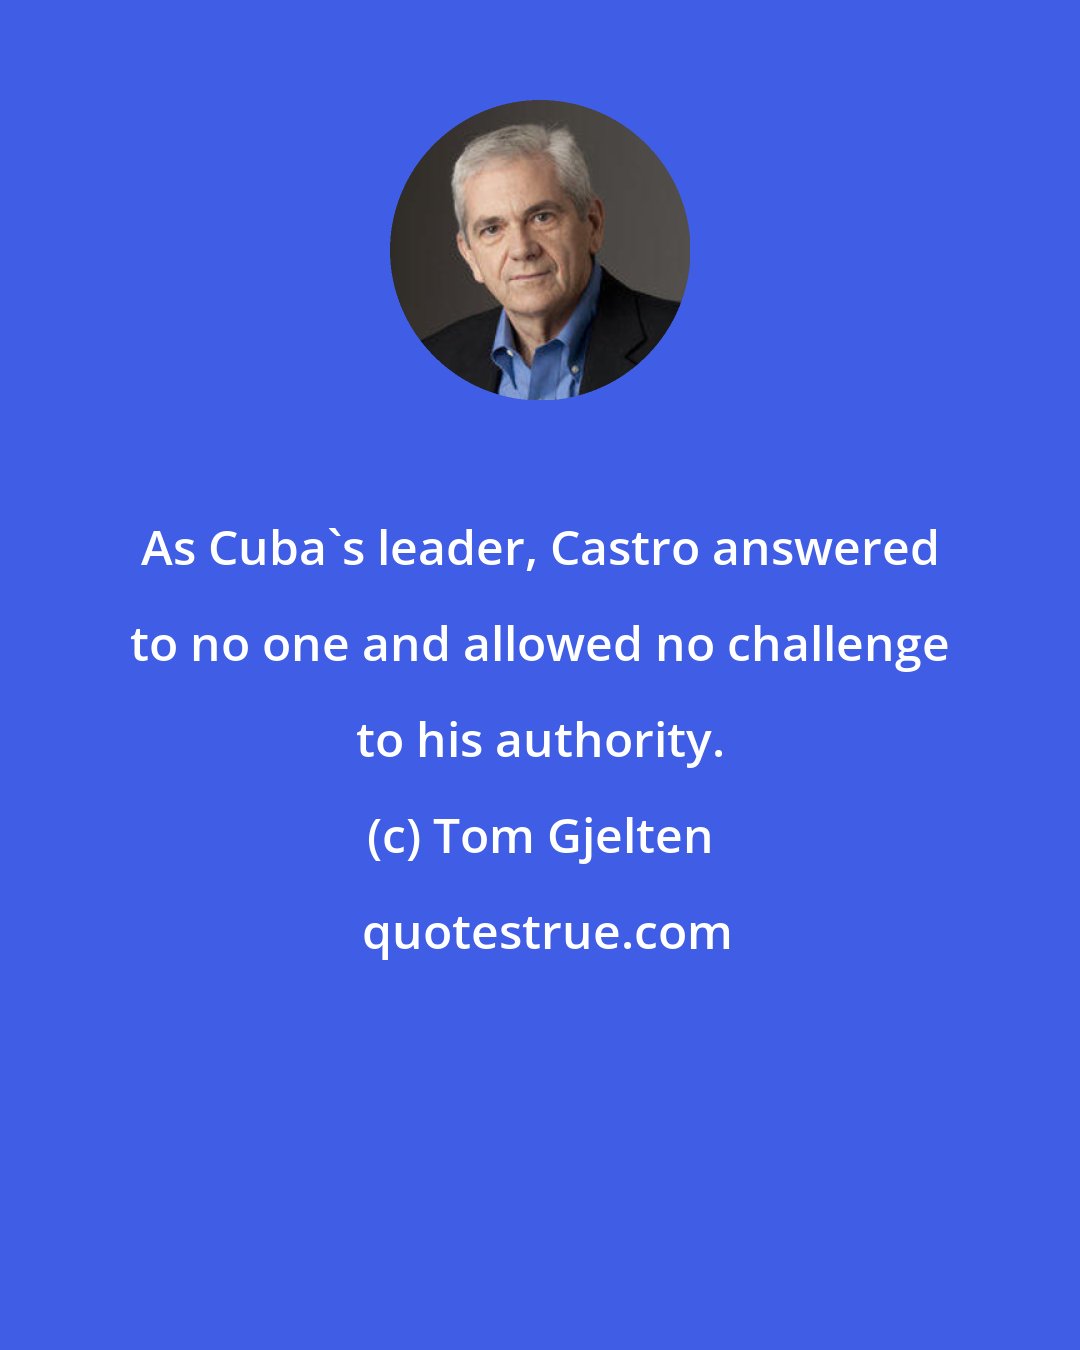 Tom Gjelten: As Cuba's leader, Castro answered to no one and allowed no challenge to his authority.